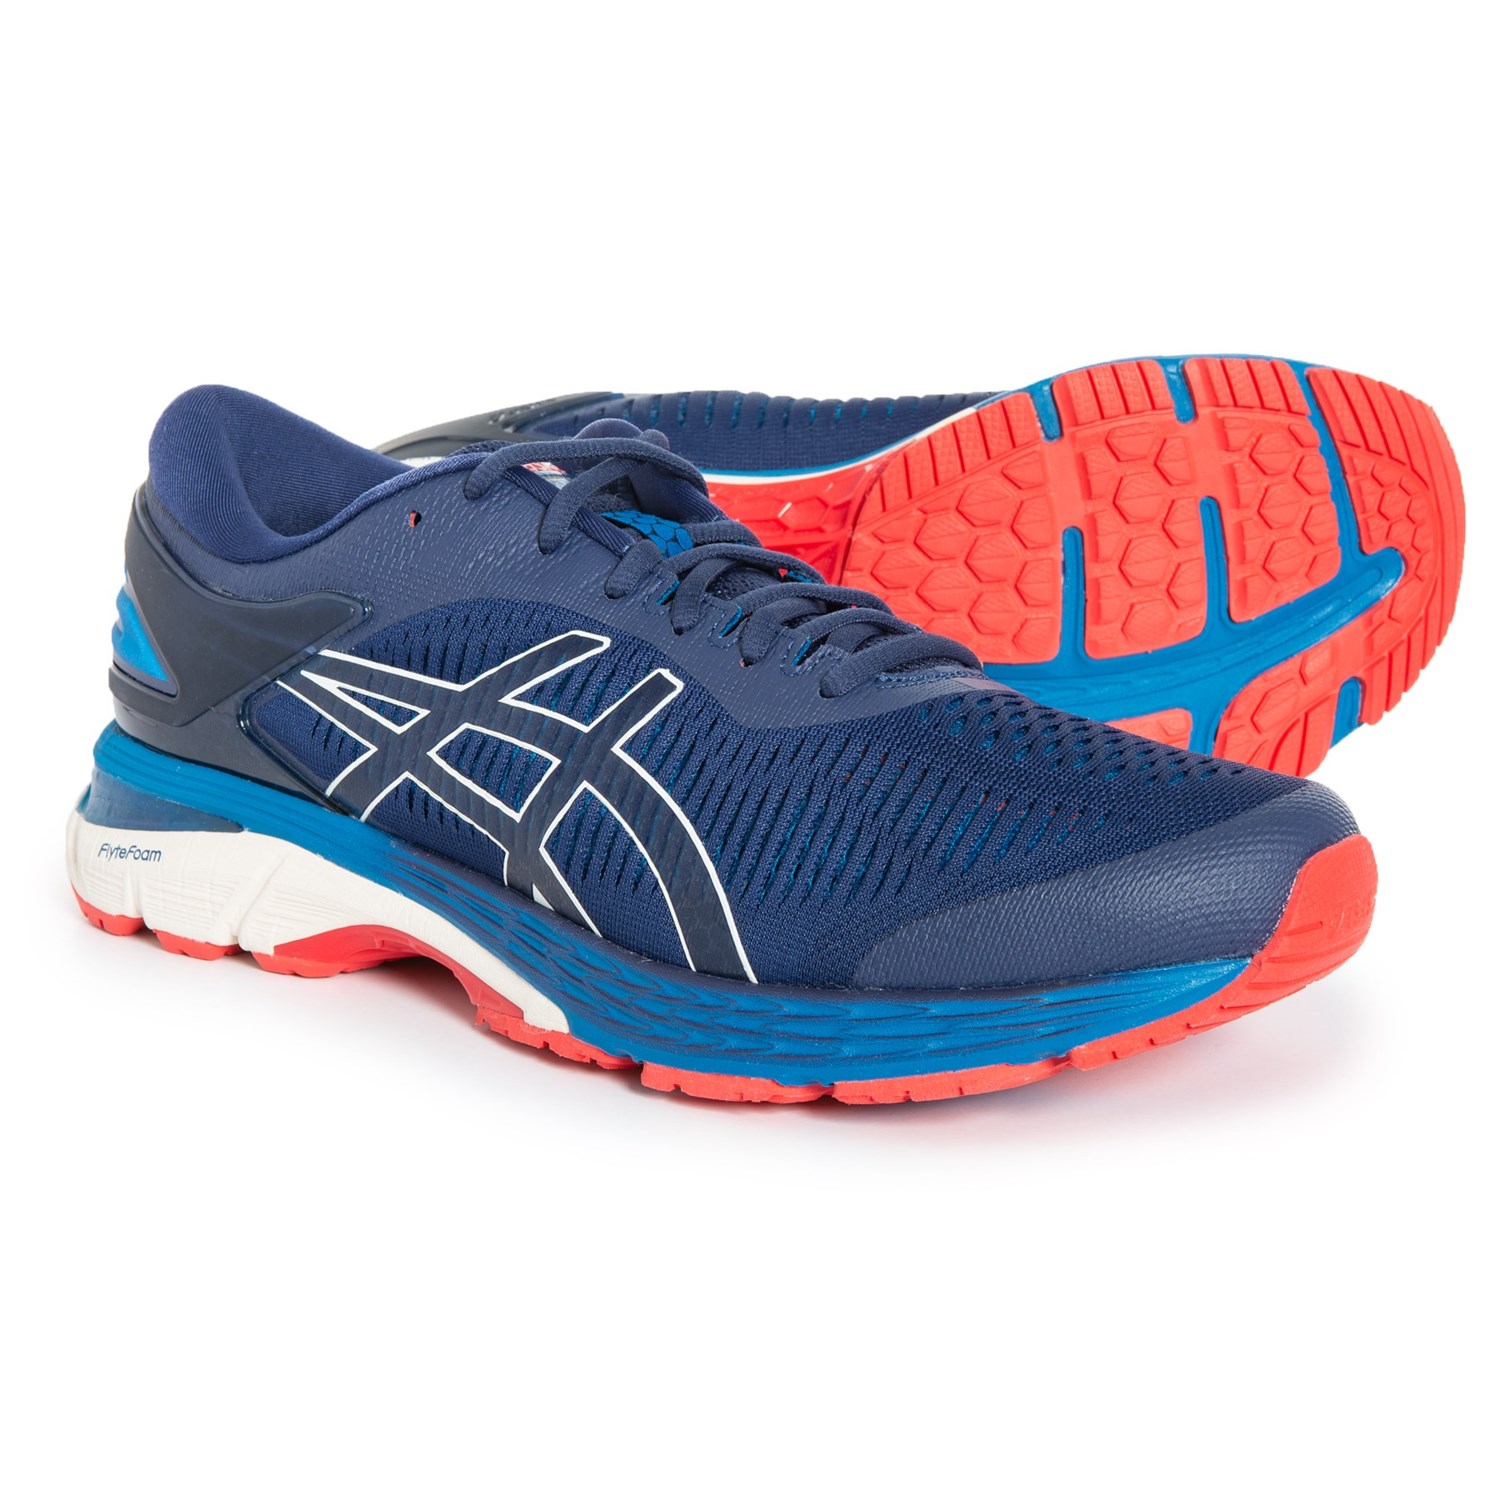 asics clearance running shoes